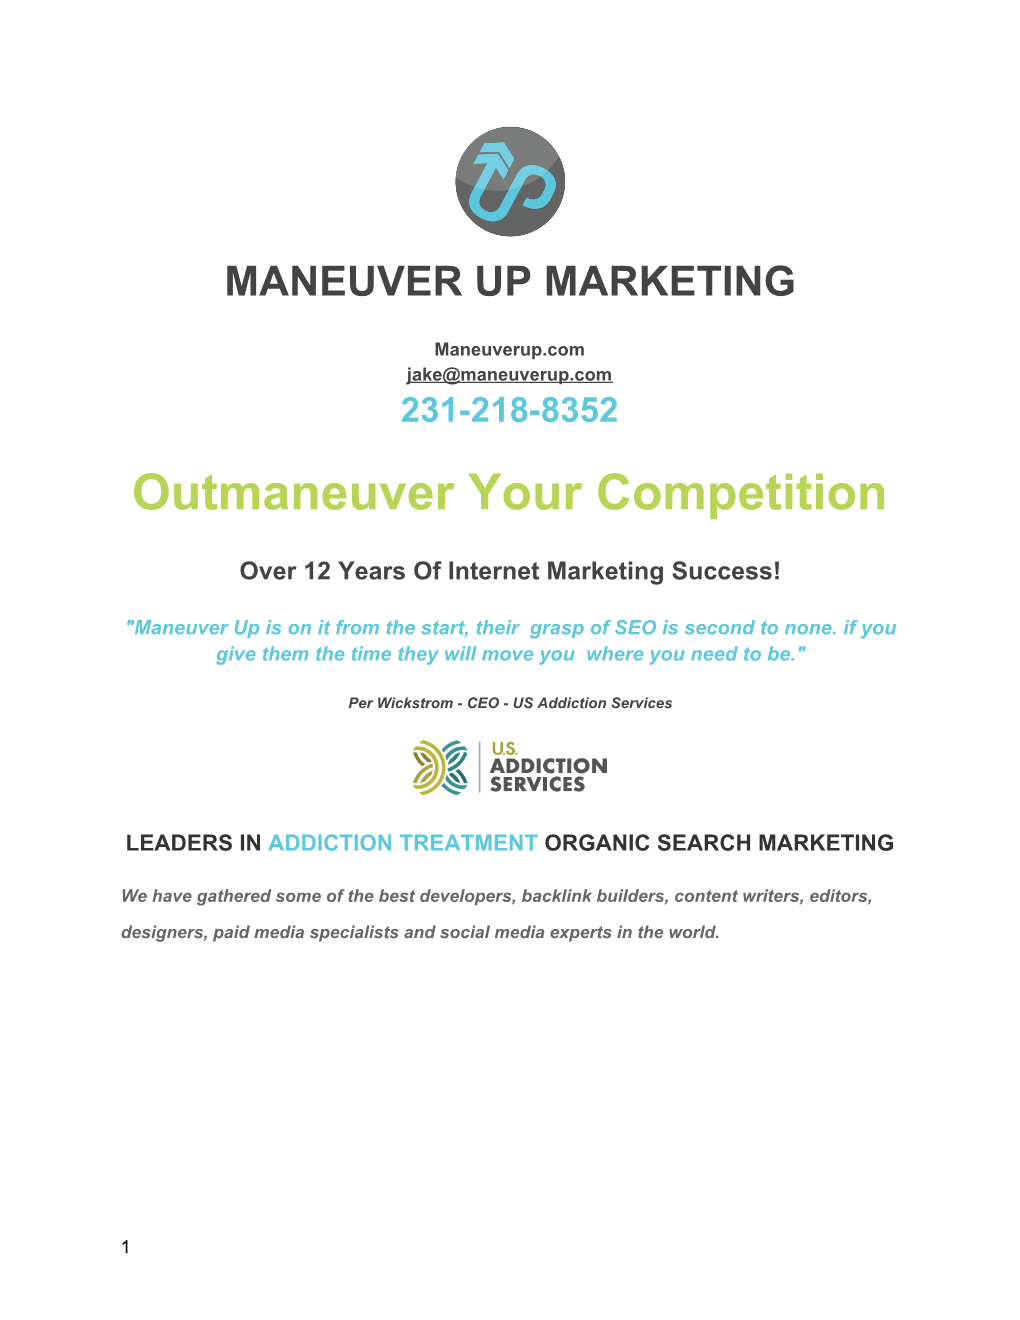 Outmaneuver Your Competition